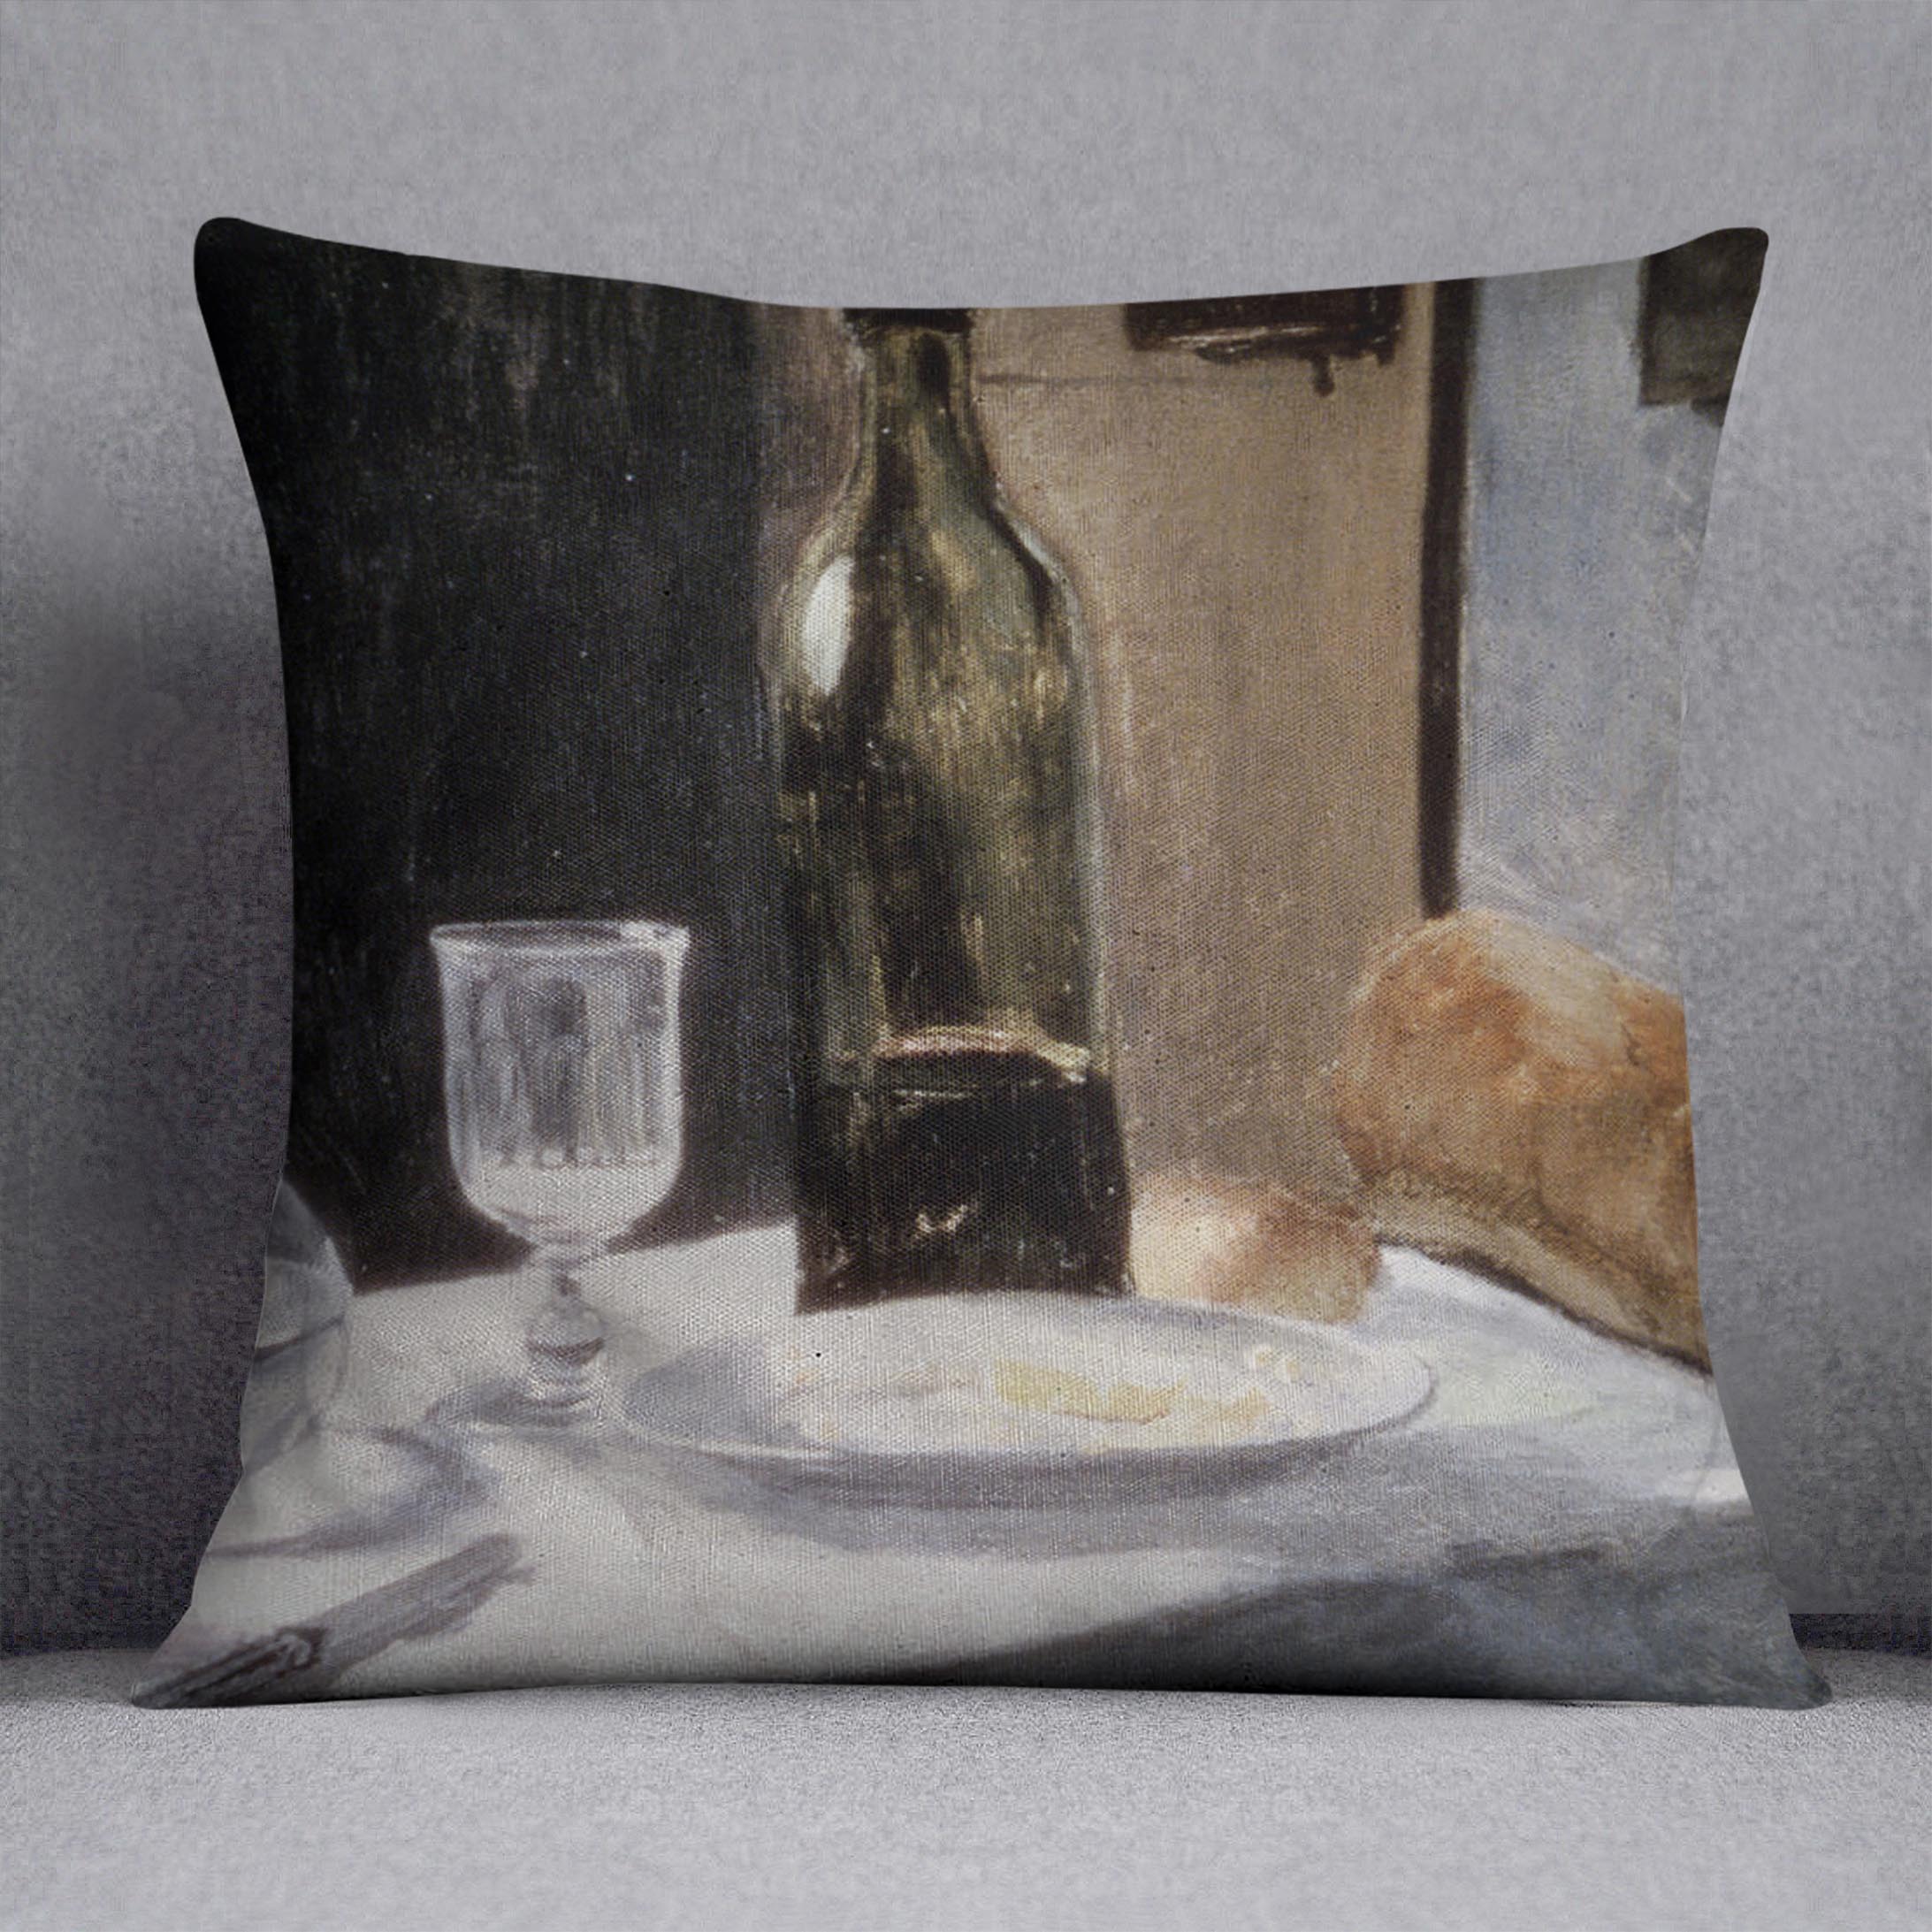 Still Life With Bottles by Monet Cushion